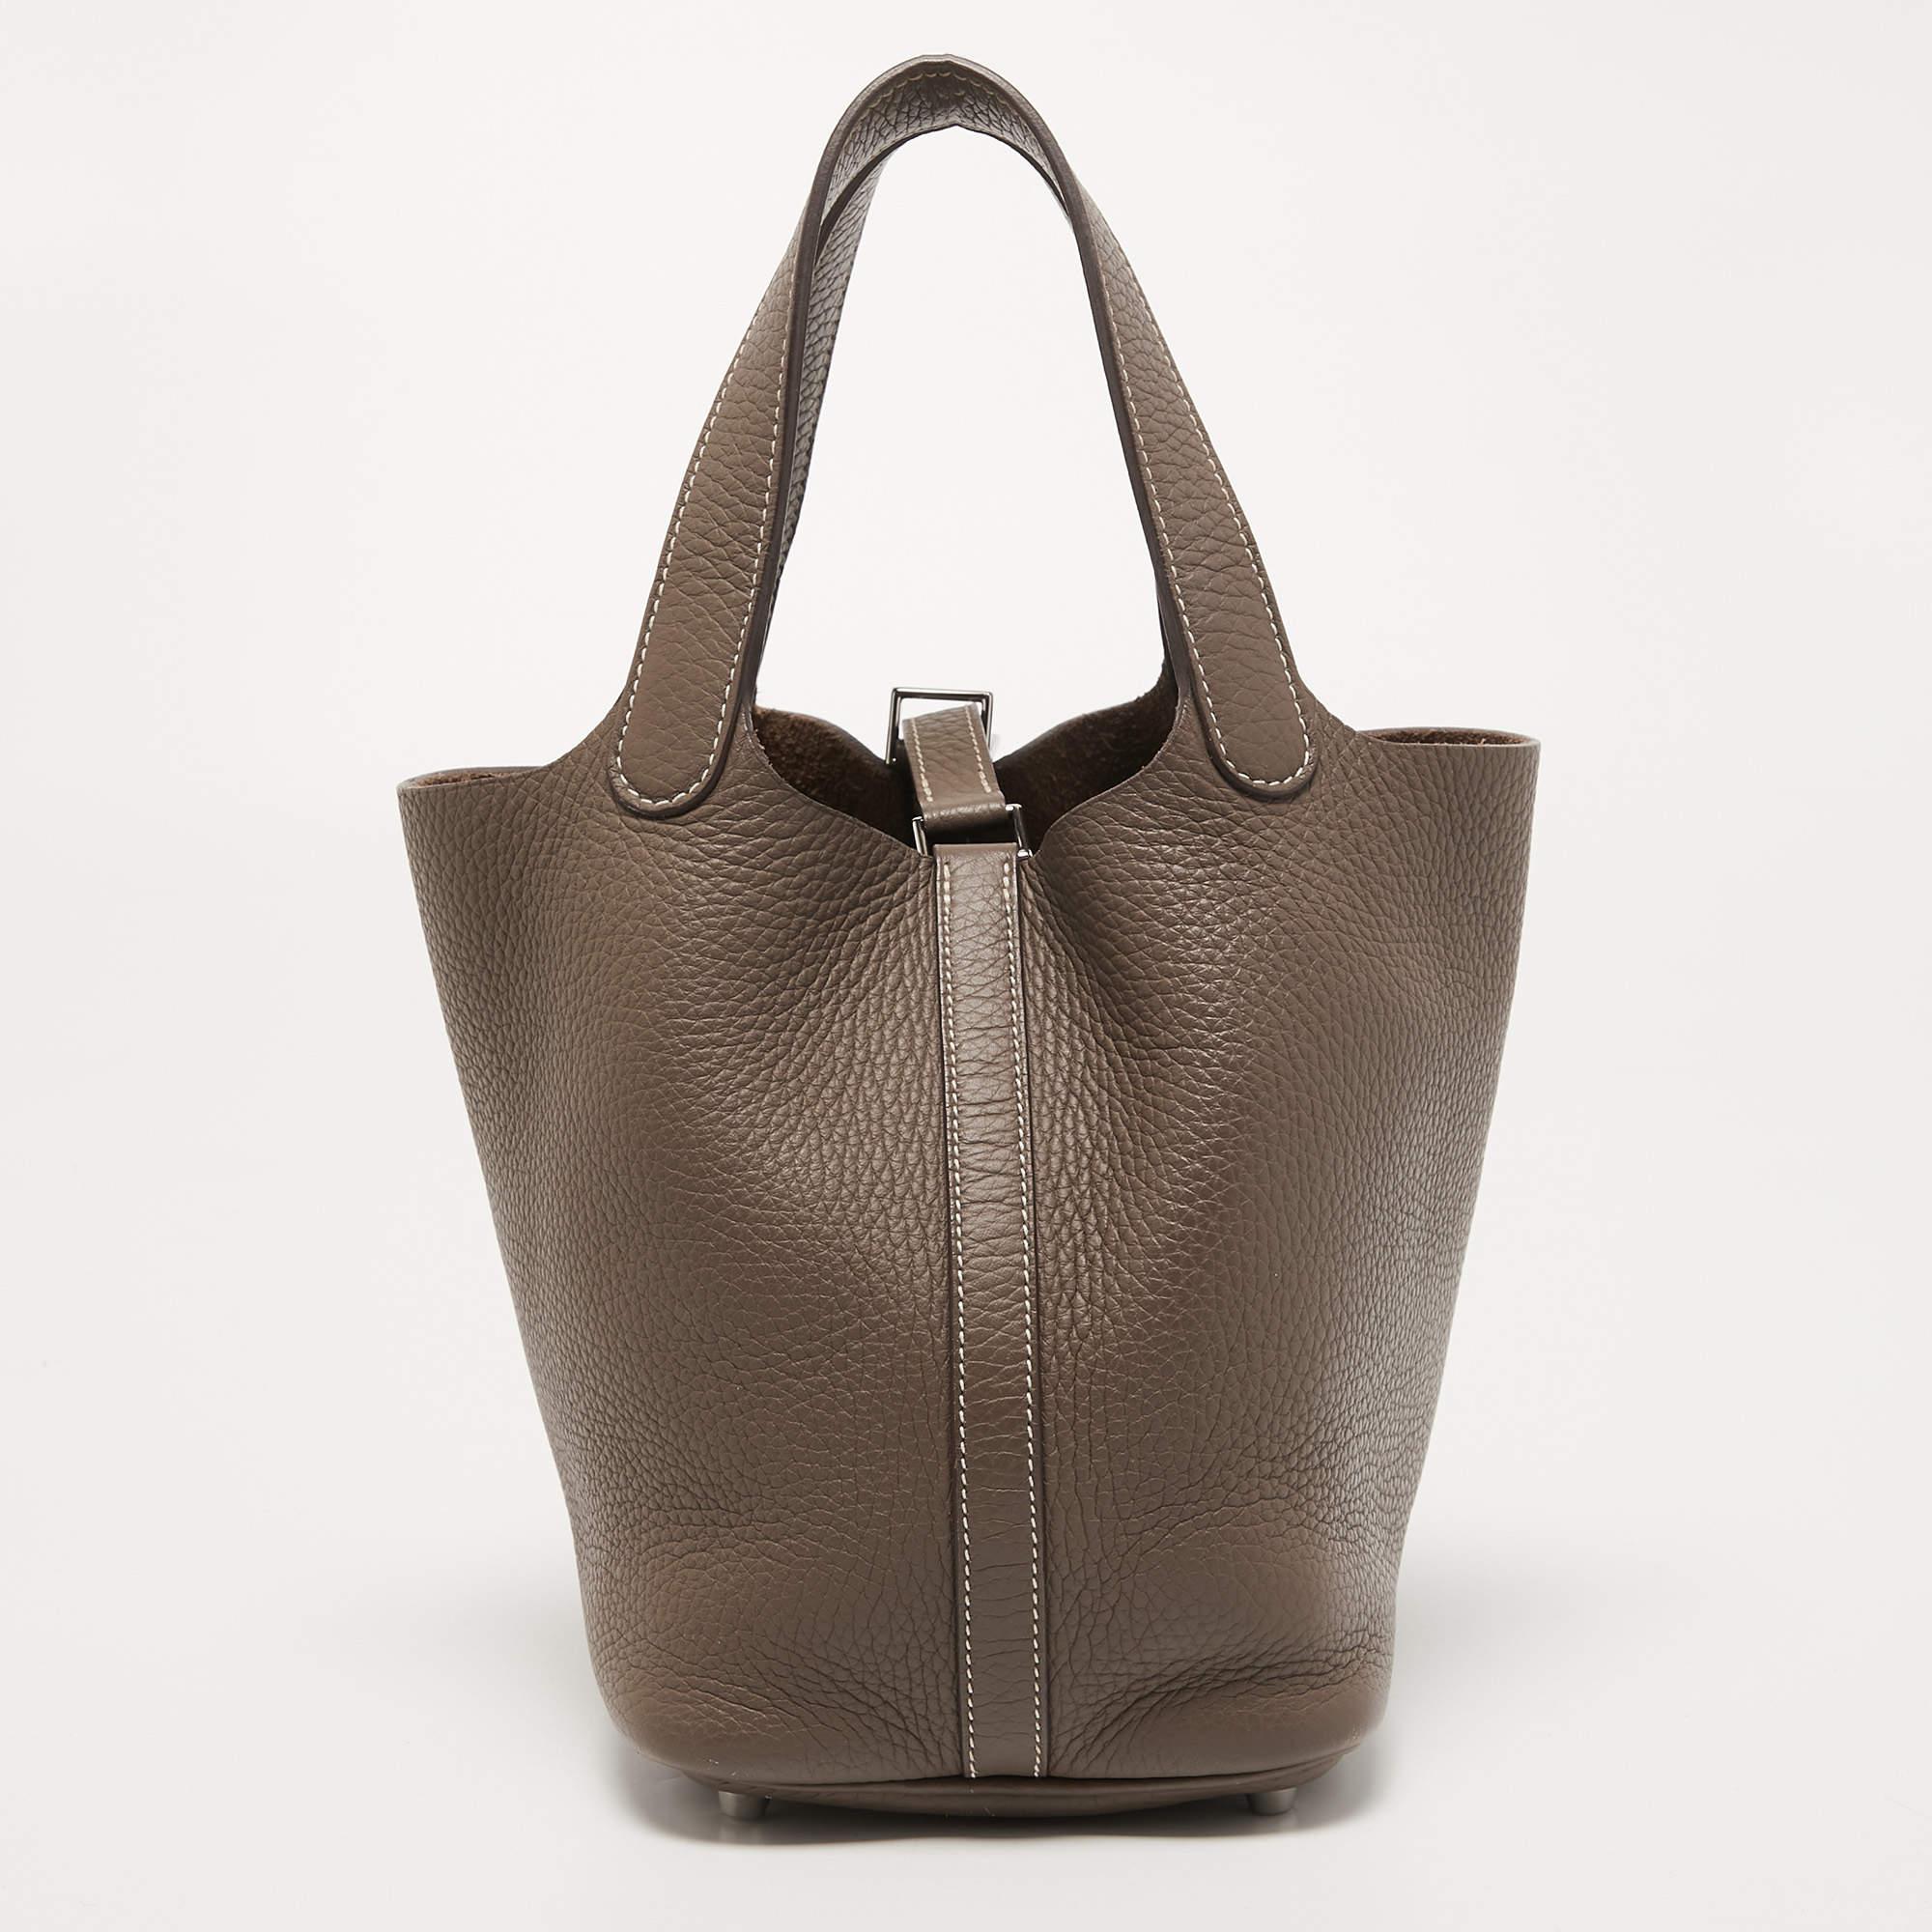 Wonderfully crafted from Taurillon Clemence leather, this Picotin from Hermes is a creation for people who love a perfect blend of luxury and style. It comes in a classy shade, and it sits in a relaxed shape with two handles and a well-sized